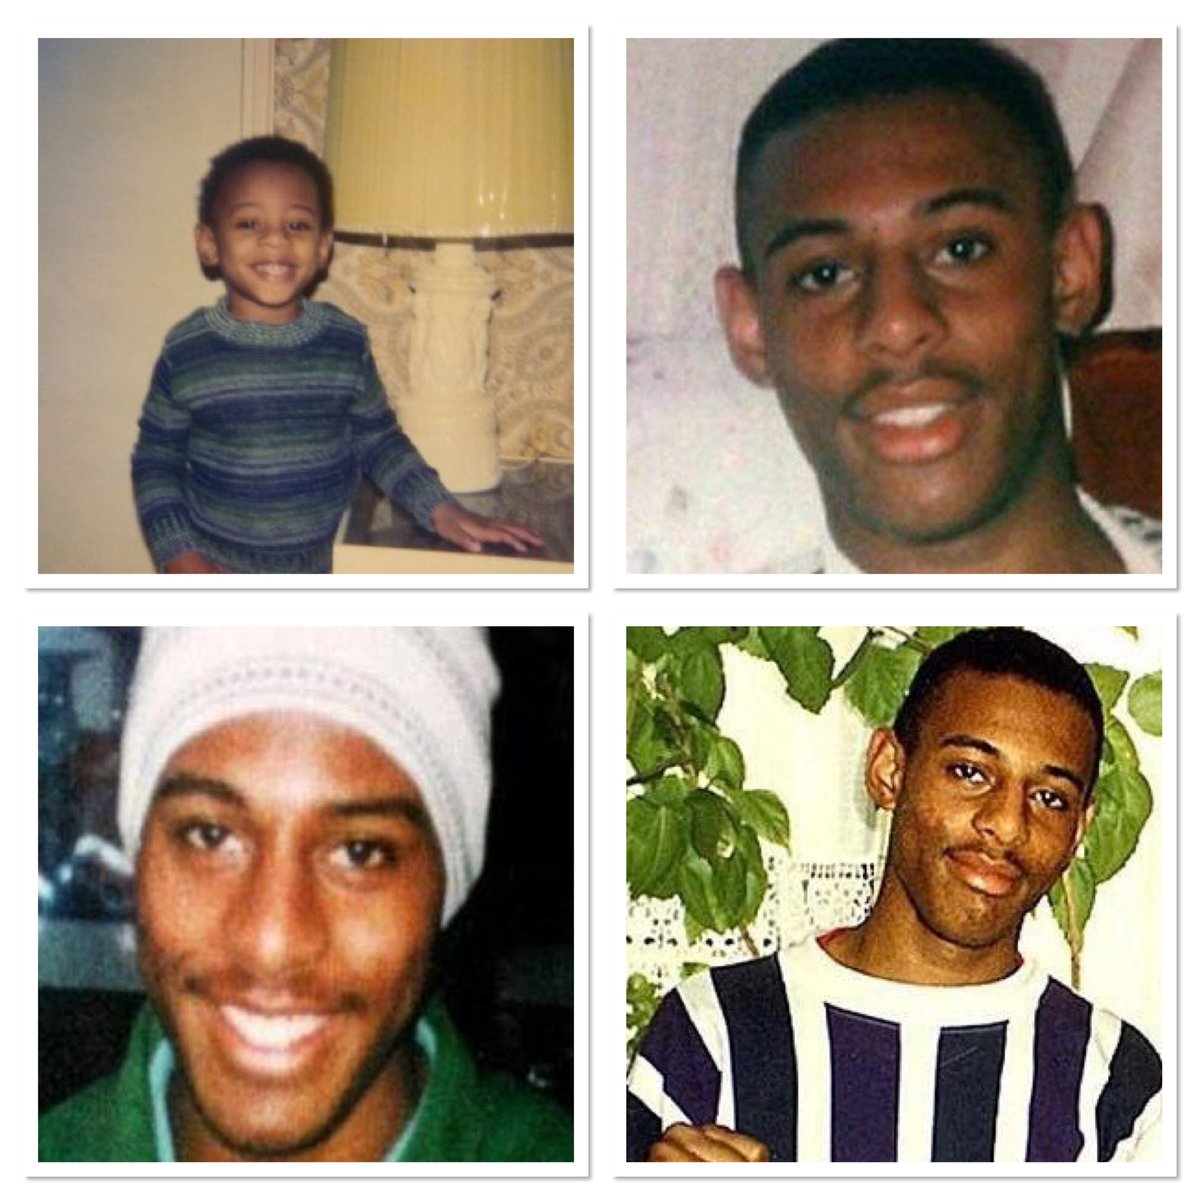 31st anniversary of the murder of Stephen Lawrence. He never grew to adulthood. But at least two of his likely killers still walk free. The Met Police must bring them to justice